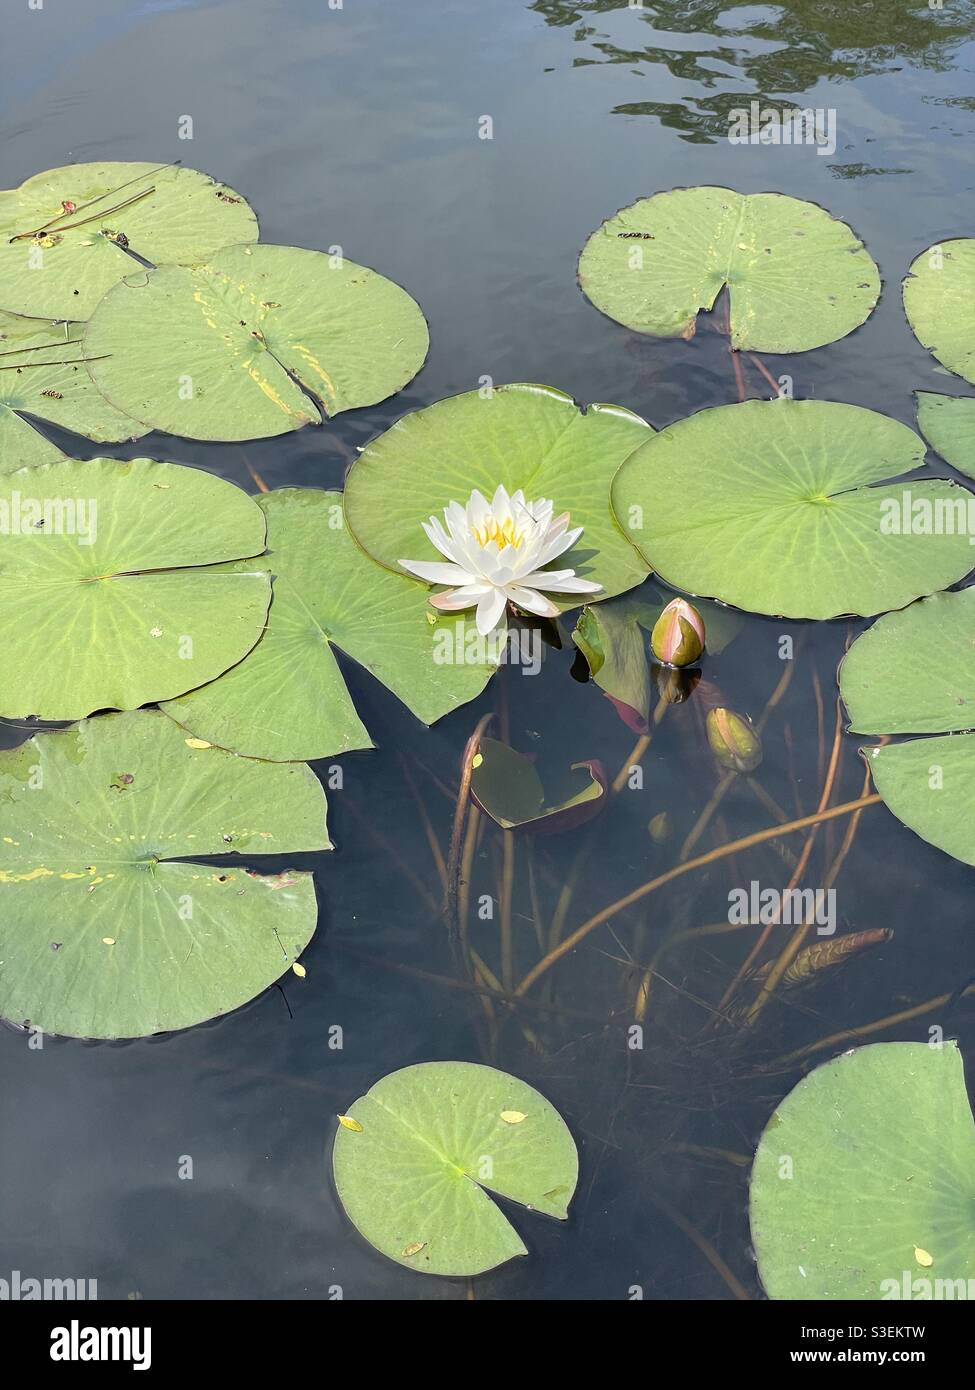 White water lily with pads and blooms emerging from the murky water Stock Photo